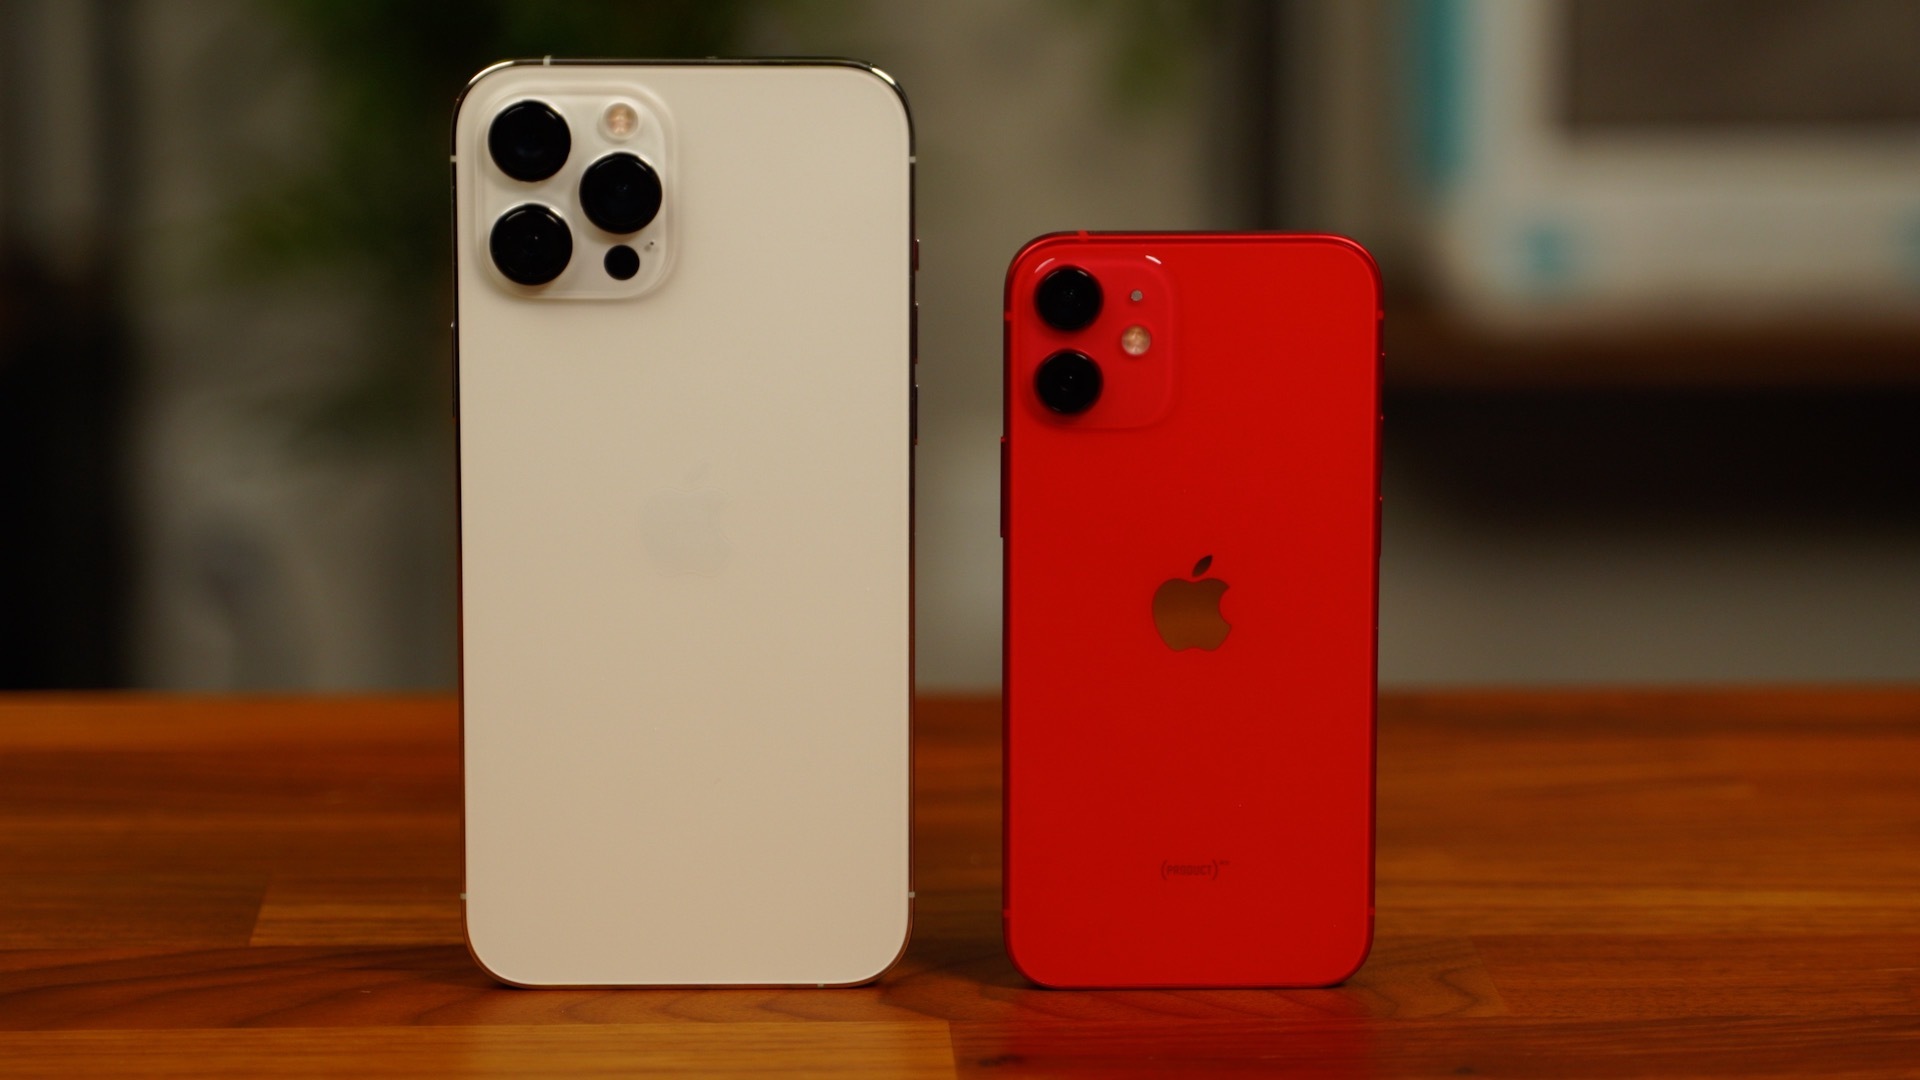 iphone-12-mini-pro-max-side-by-side.jpg